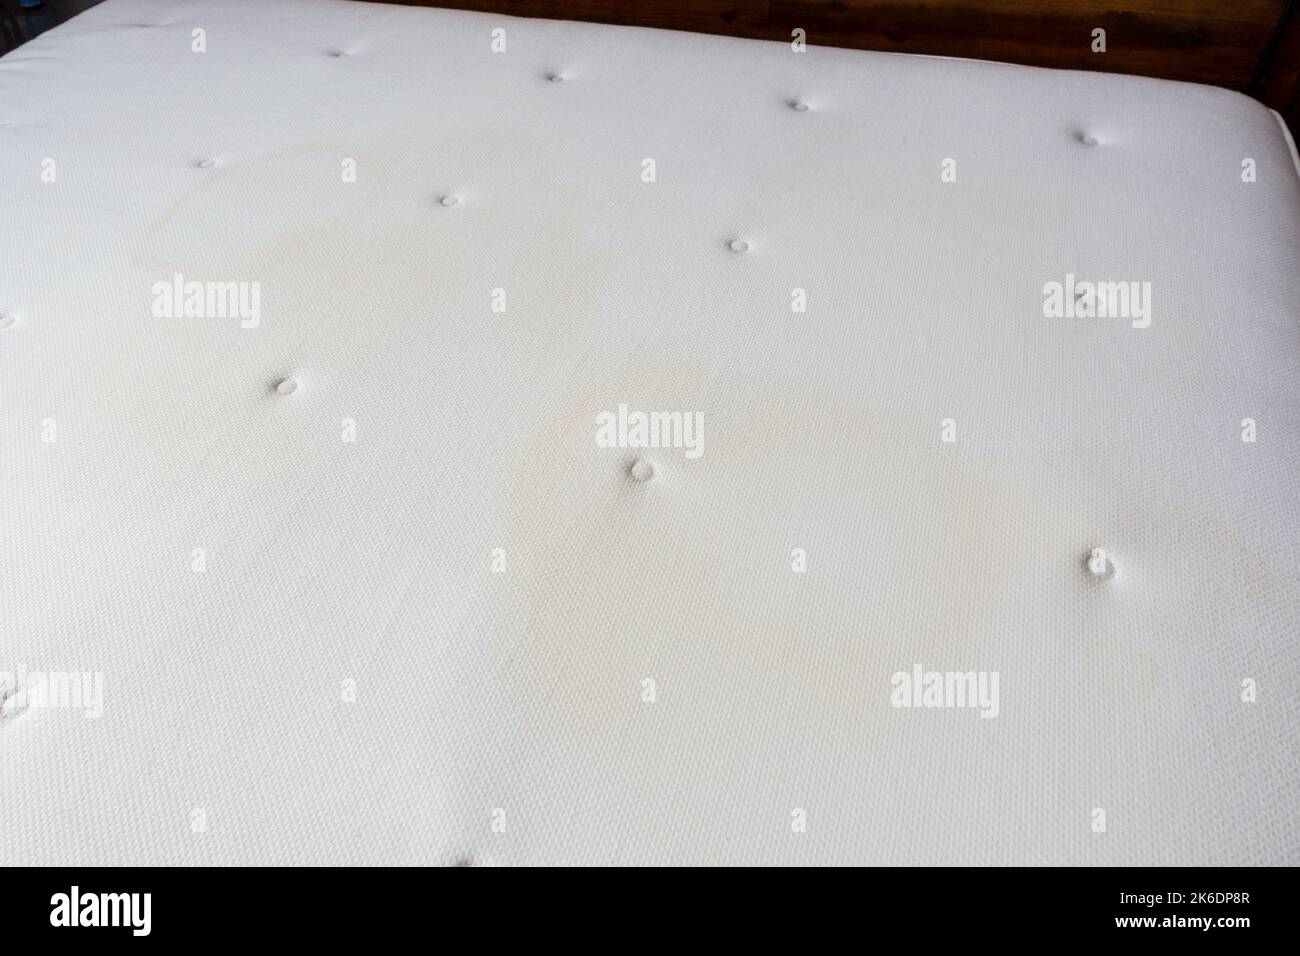 Cleaning a soiled bed mattress Stock Photo